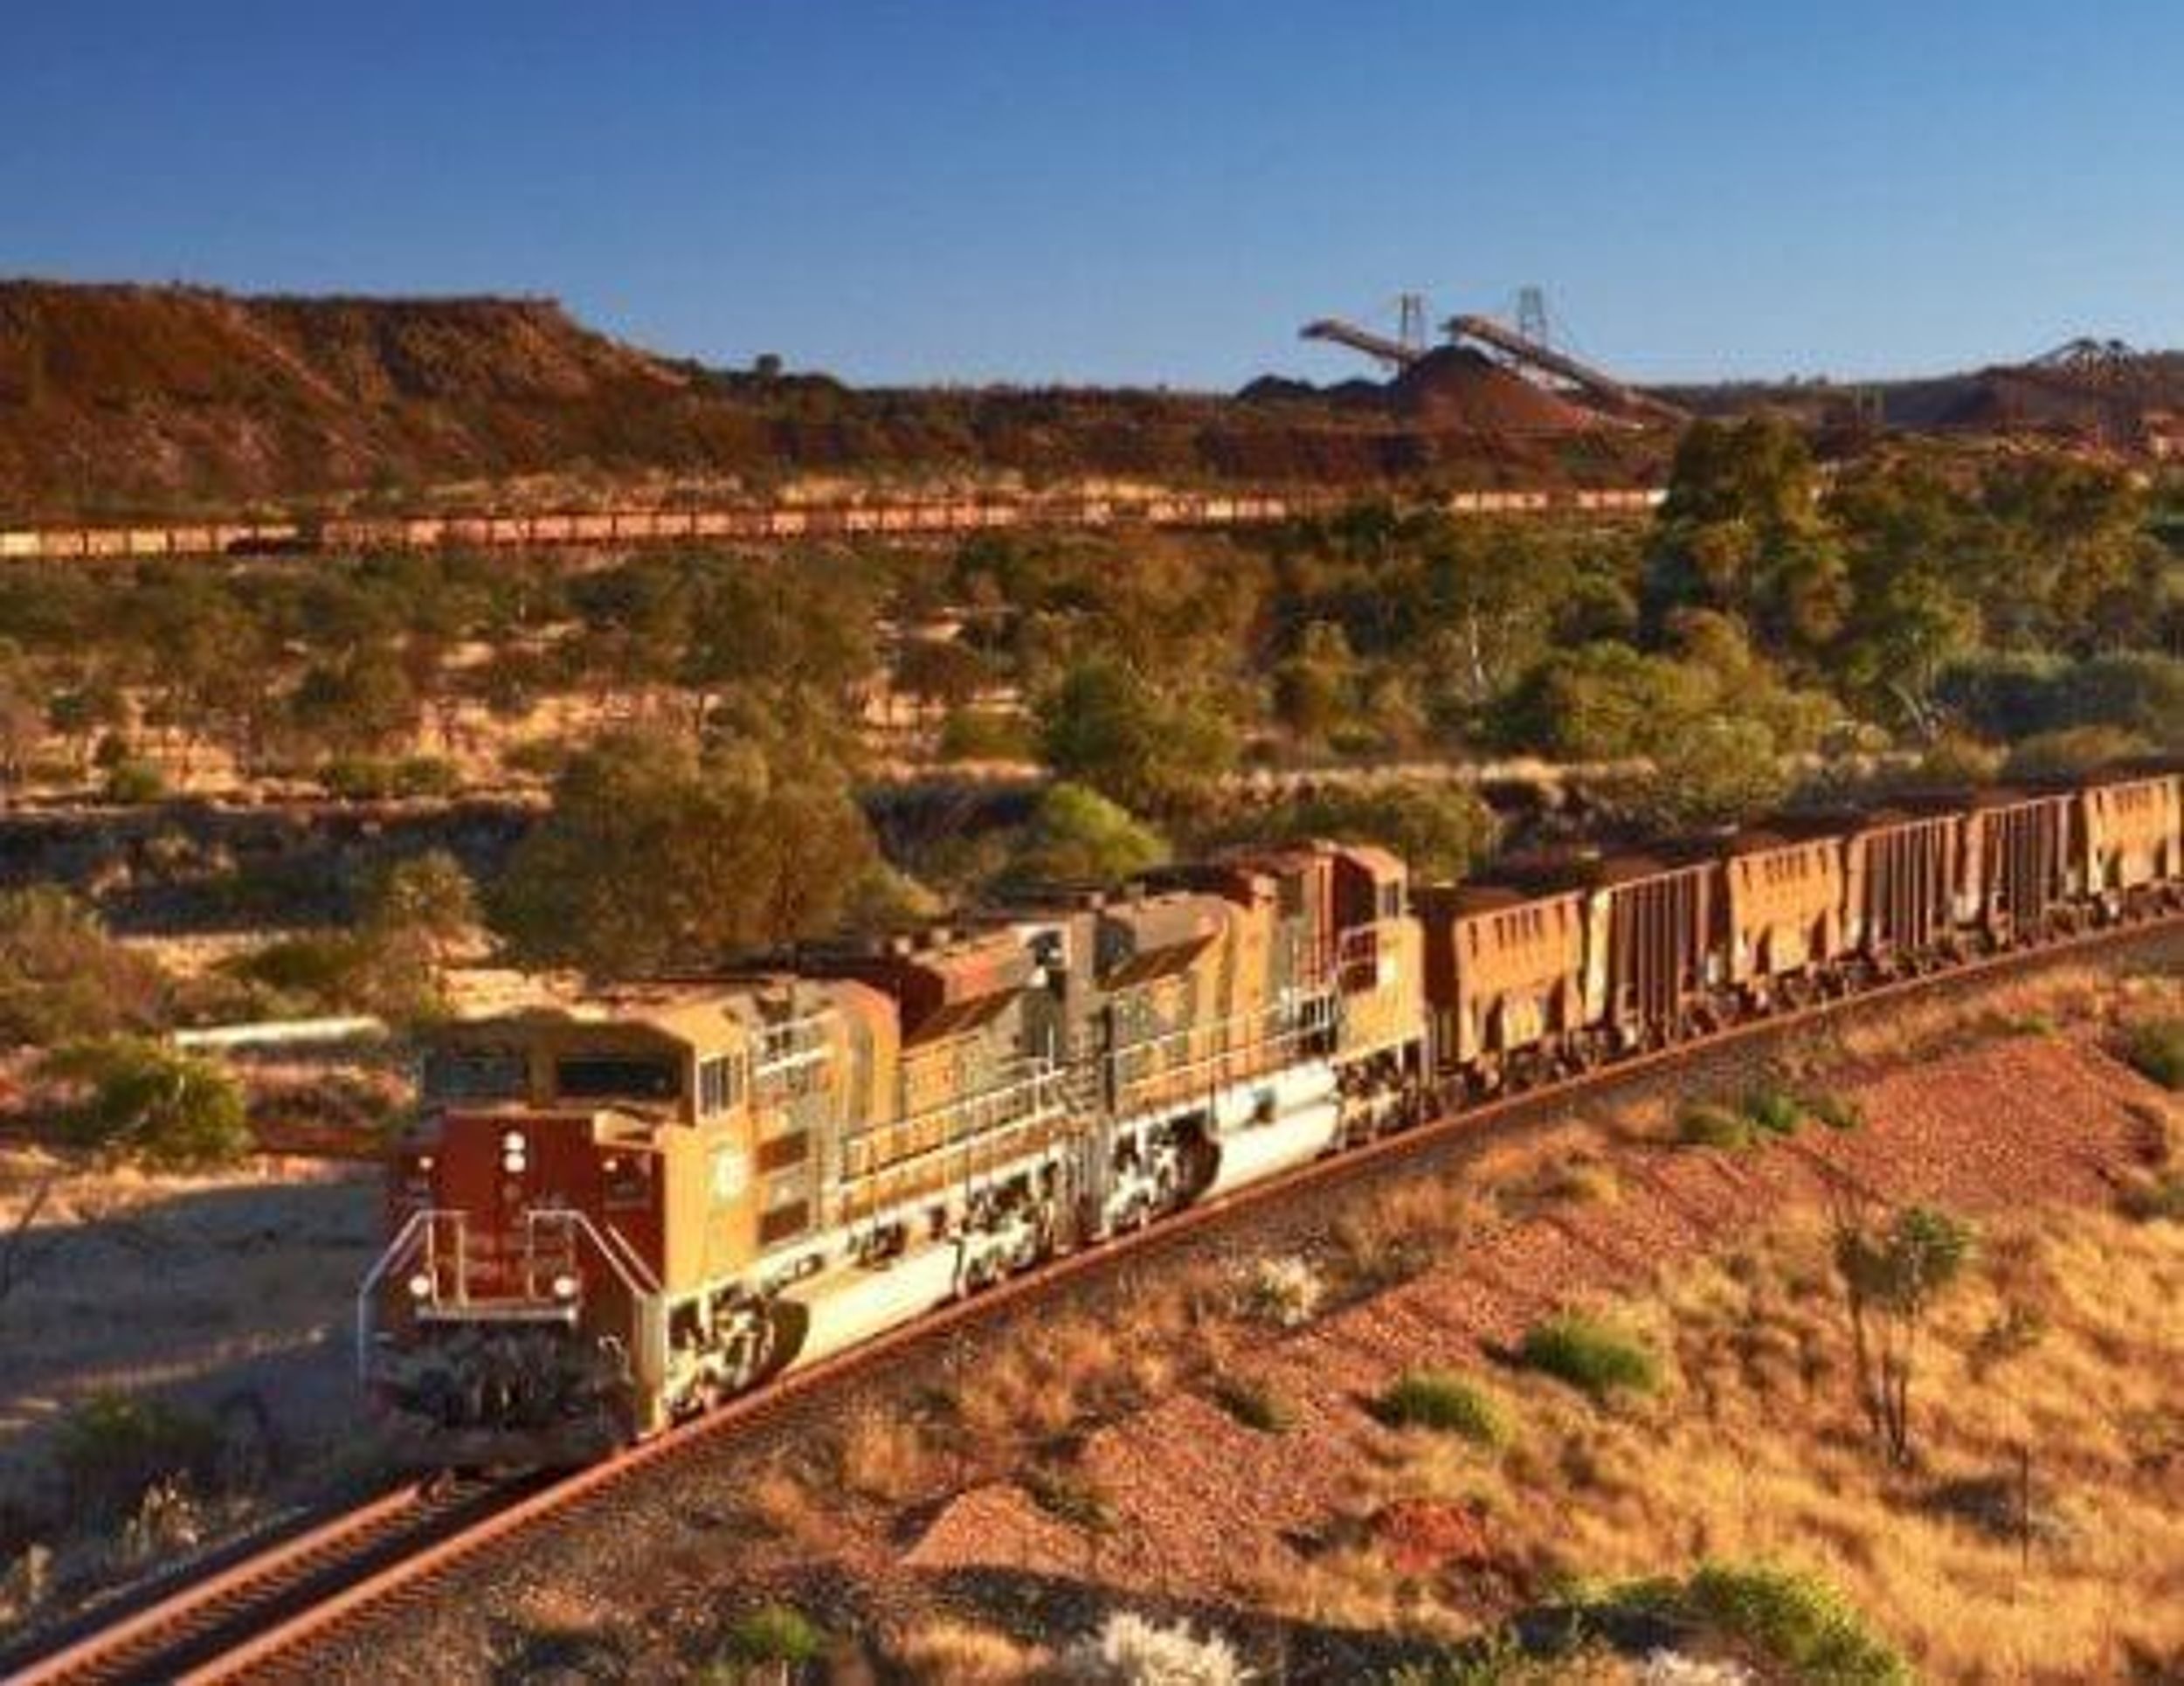 Ready, Set, Go: First Iron Ore Replacement Mine Gets Underway